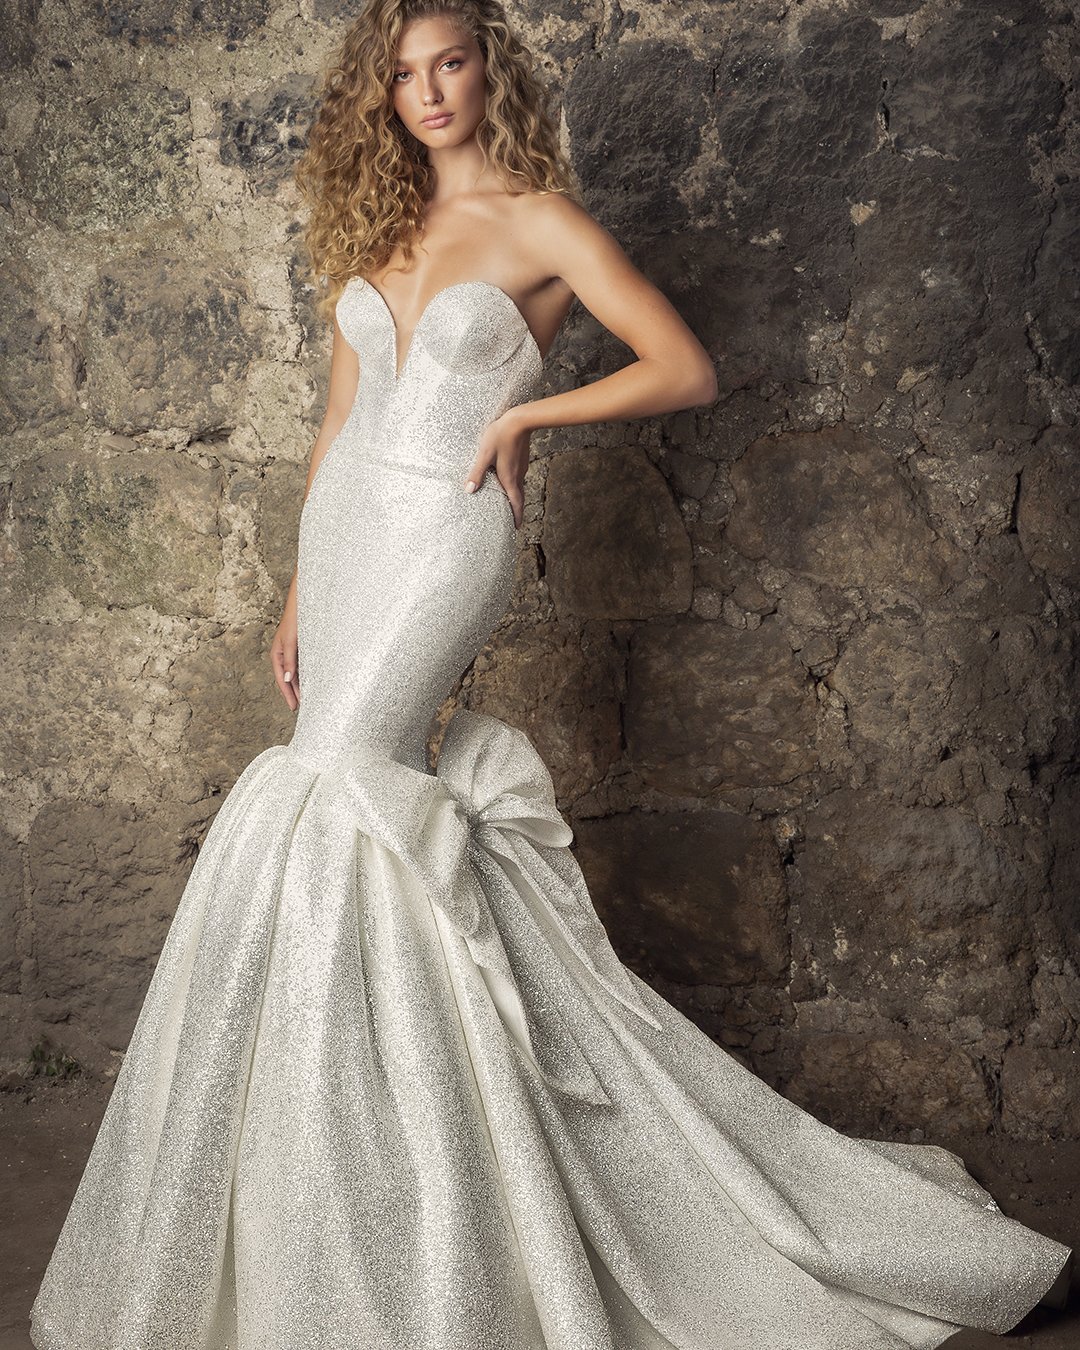 bridal dresses fit and flare sweetheart strapless neckline with bow pnina tornai